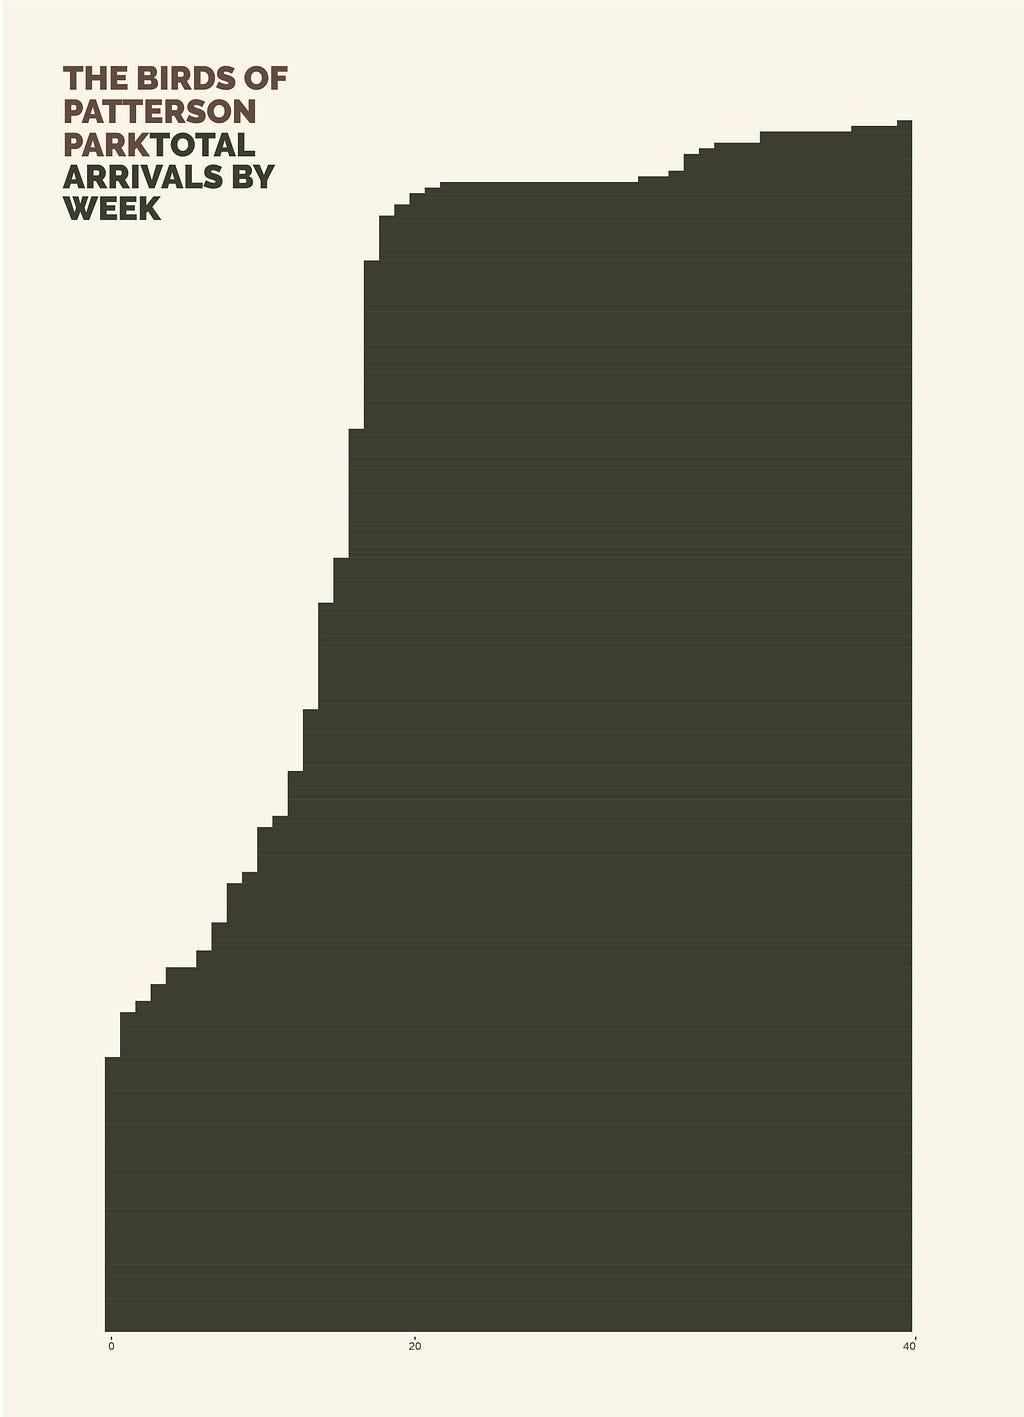 The same chart, but all black. This version is meant to represent the aspect of this chart I found appealing: the minimalism.